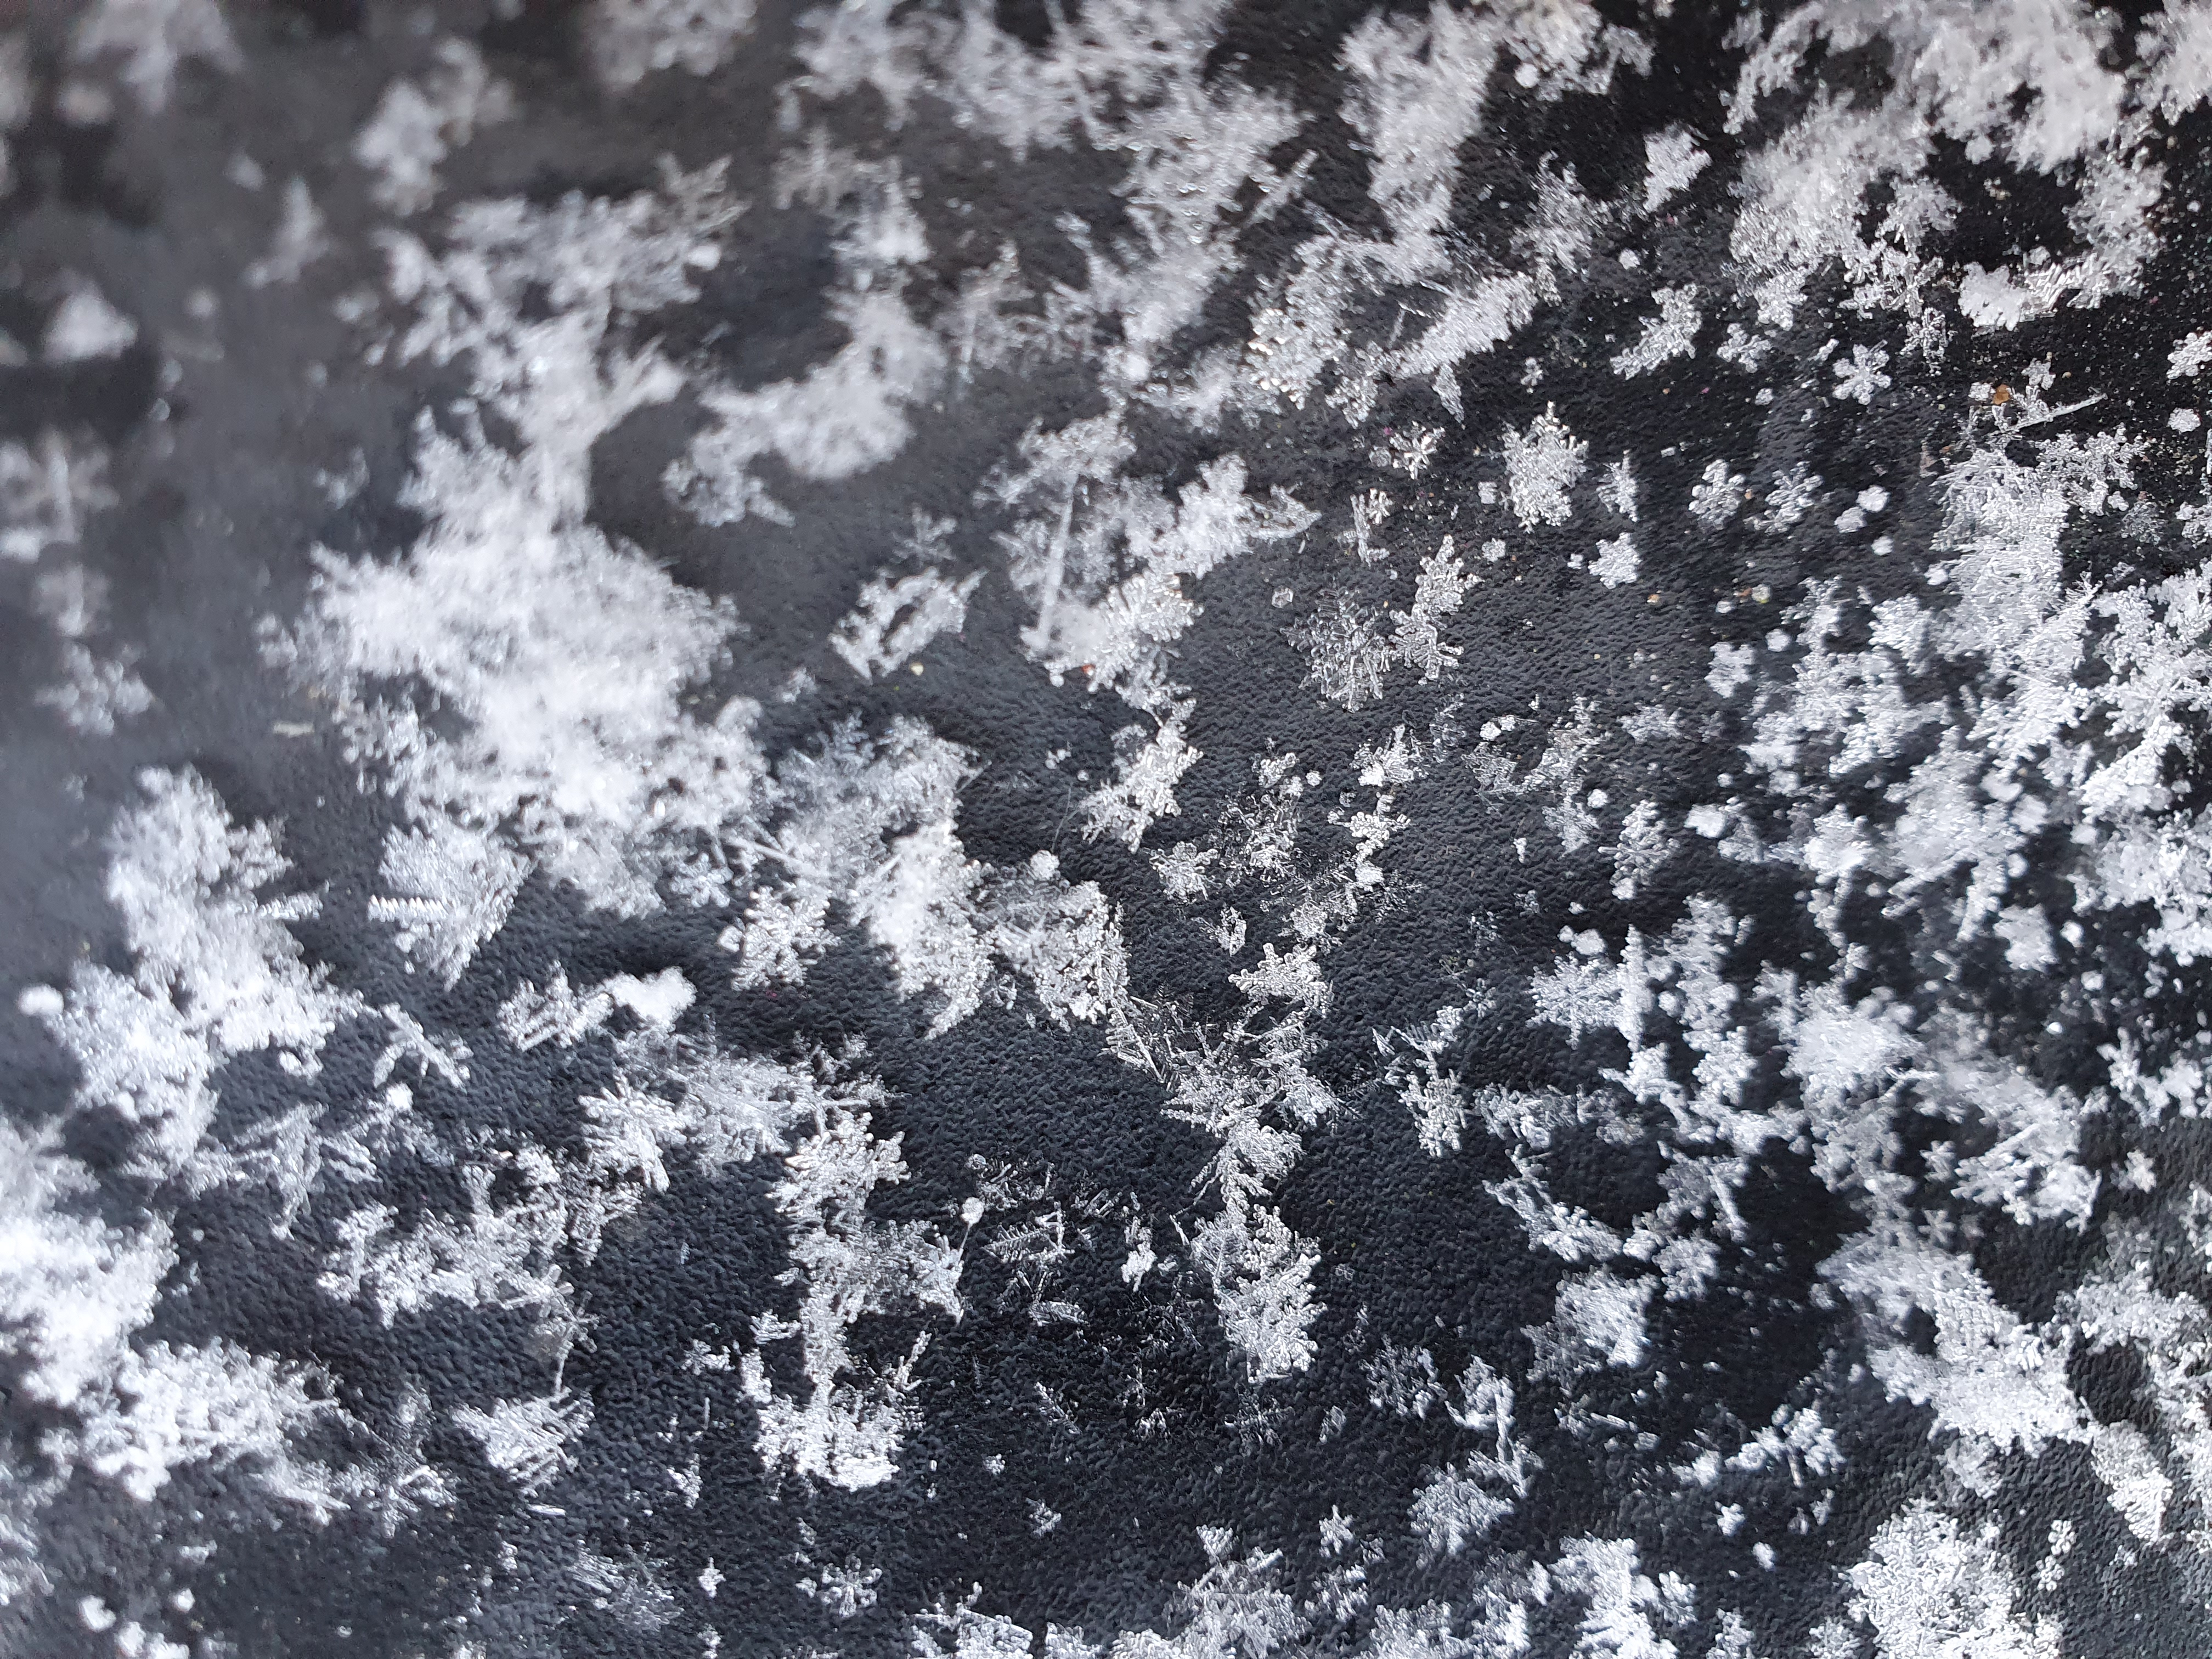 Snowflakes on a car windscreen